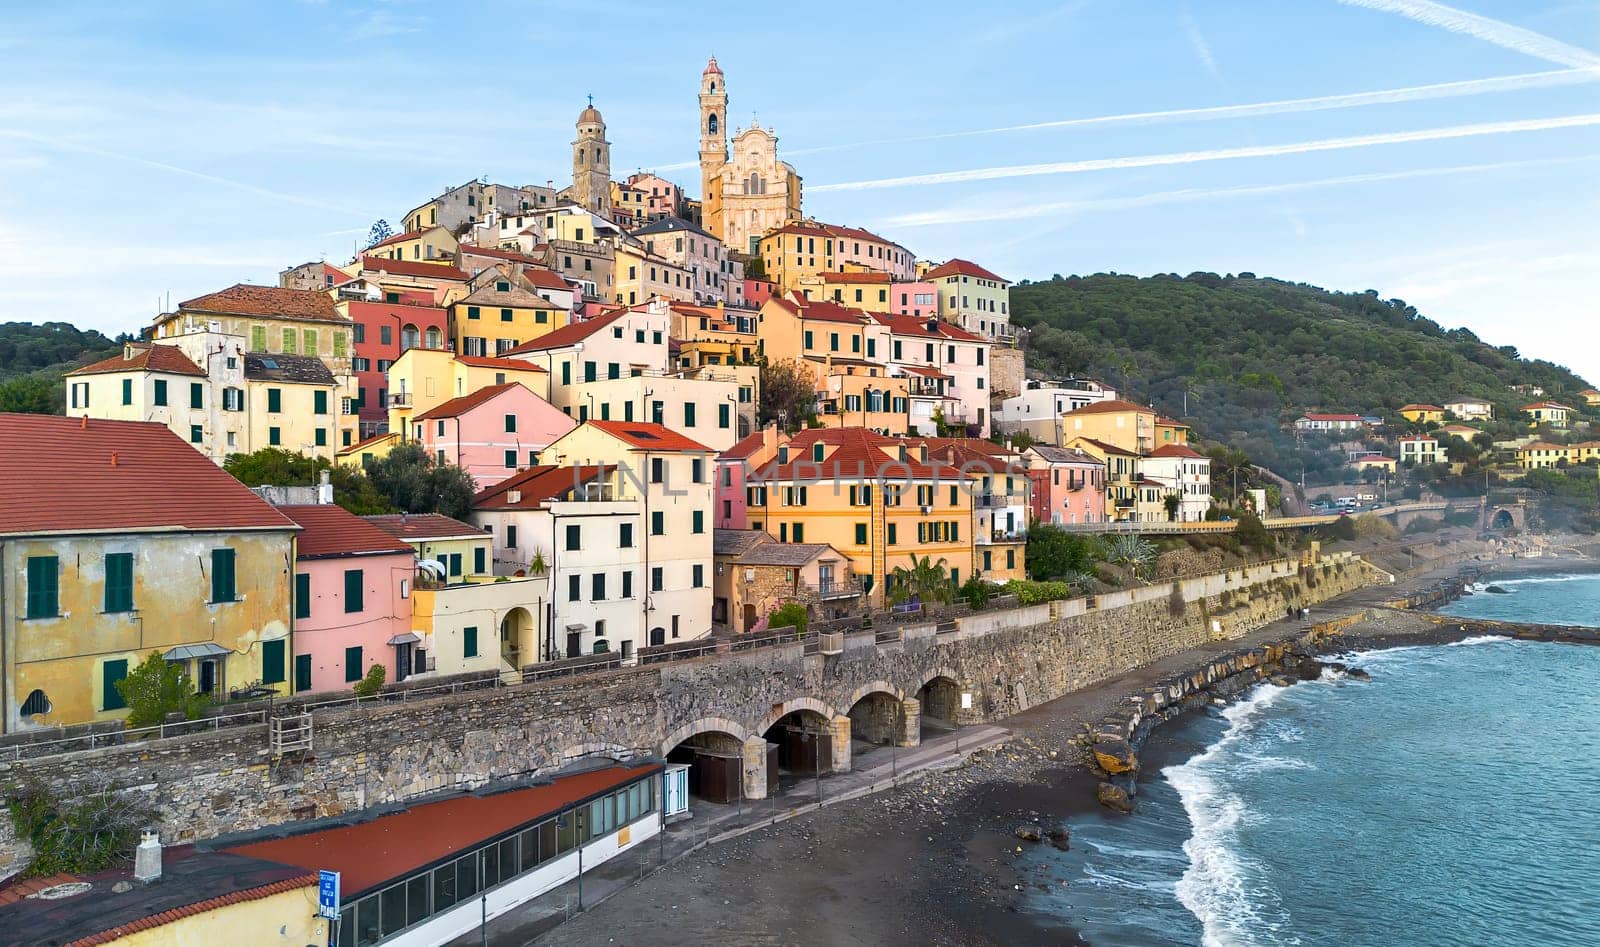 drone aerial photograph shows the church and historic structures in the Italian village of Cervo on the Ligurian coast